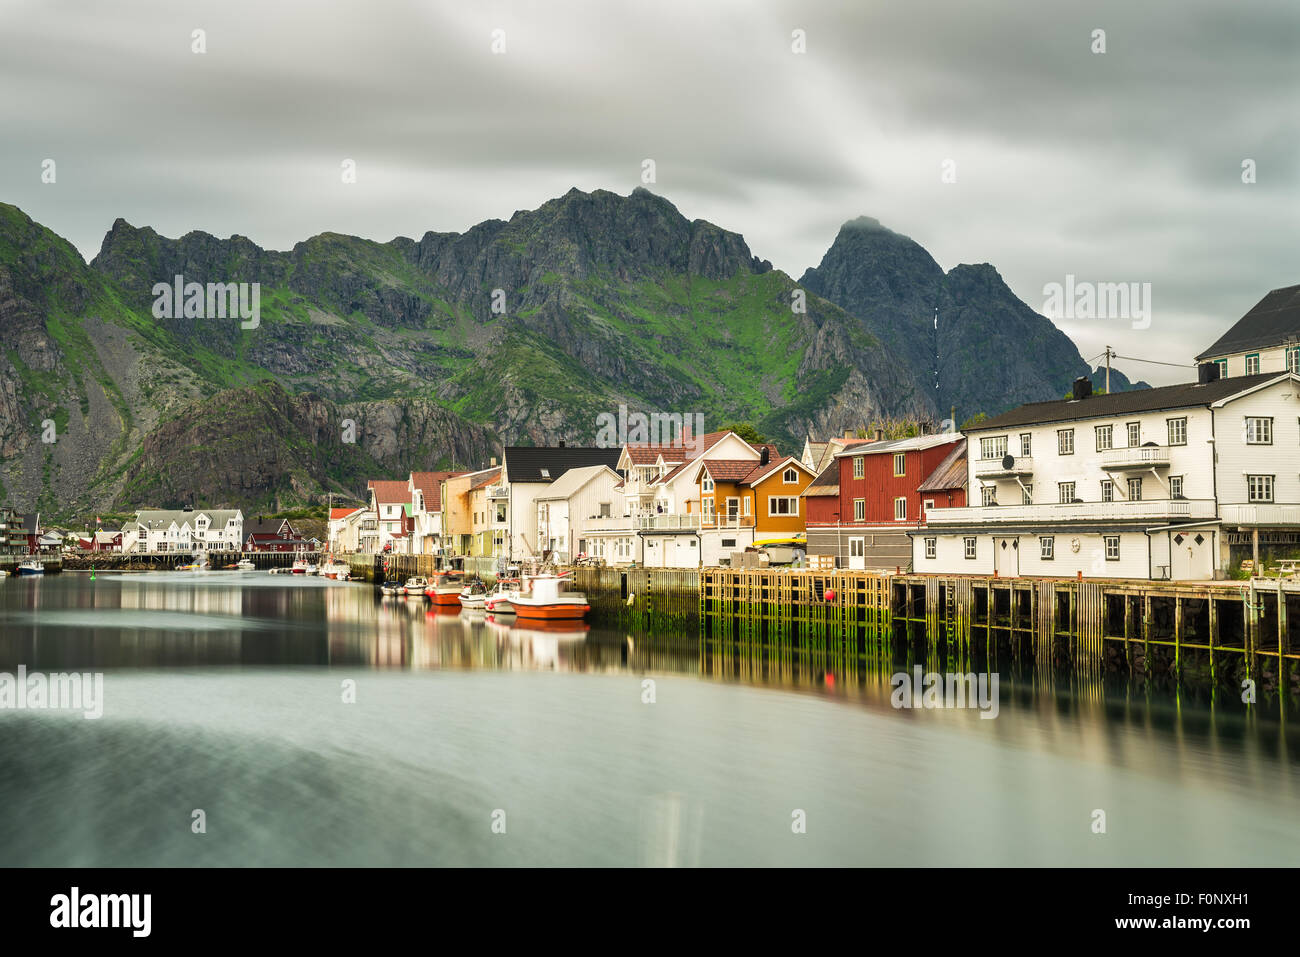 Henningsvaer,  fishing village located on several small islands  in the Lofoten archipelago, Norway. Long exposure. Stock Photo